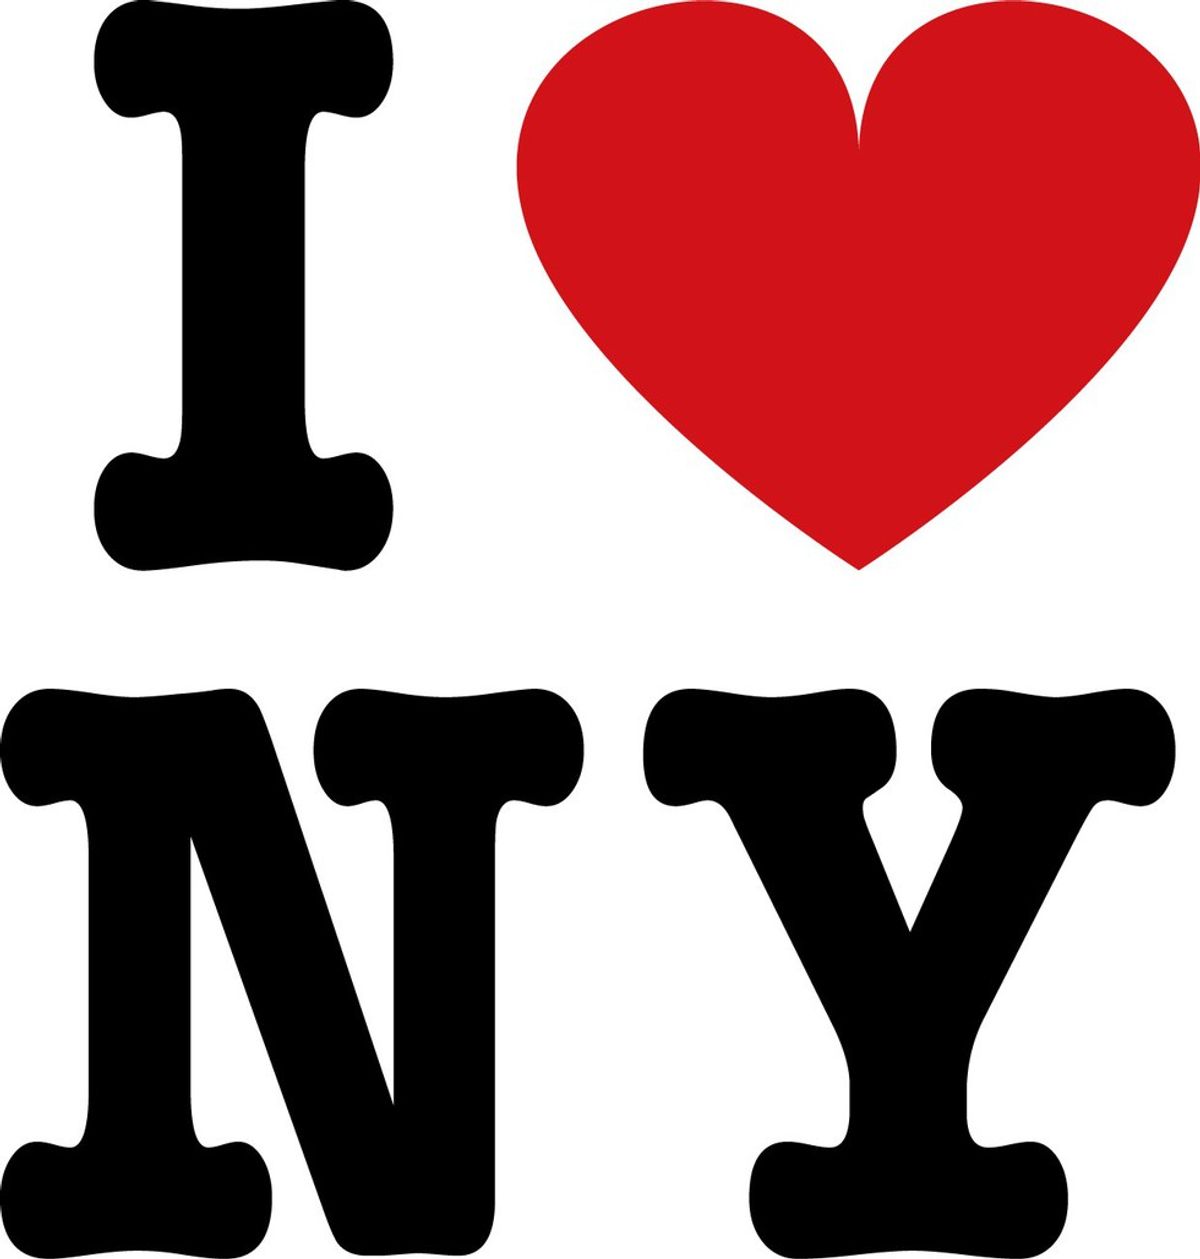 5 Reasons You Know You're From New York